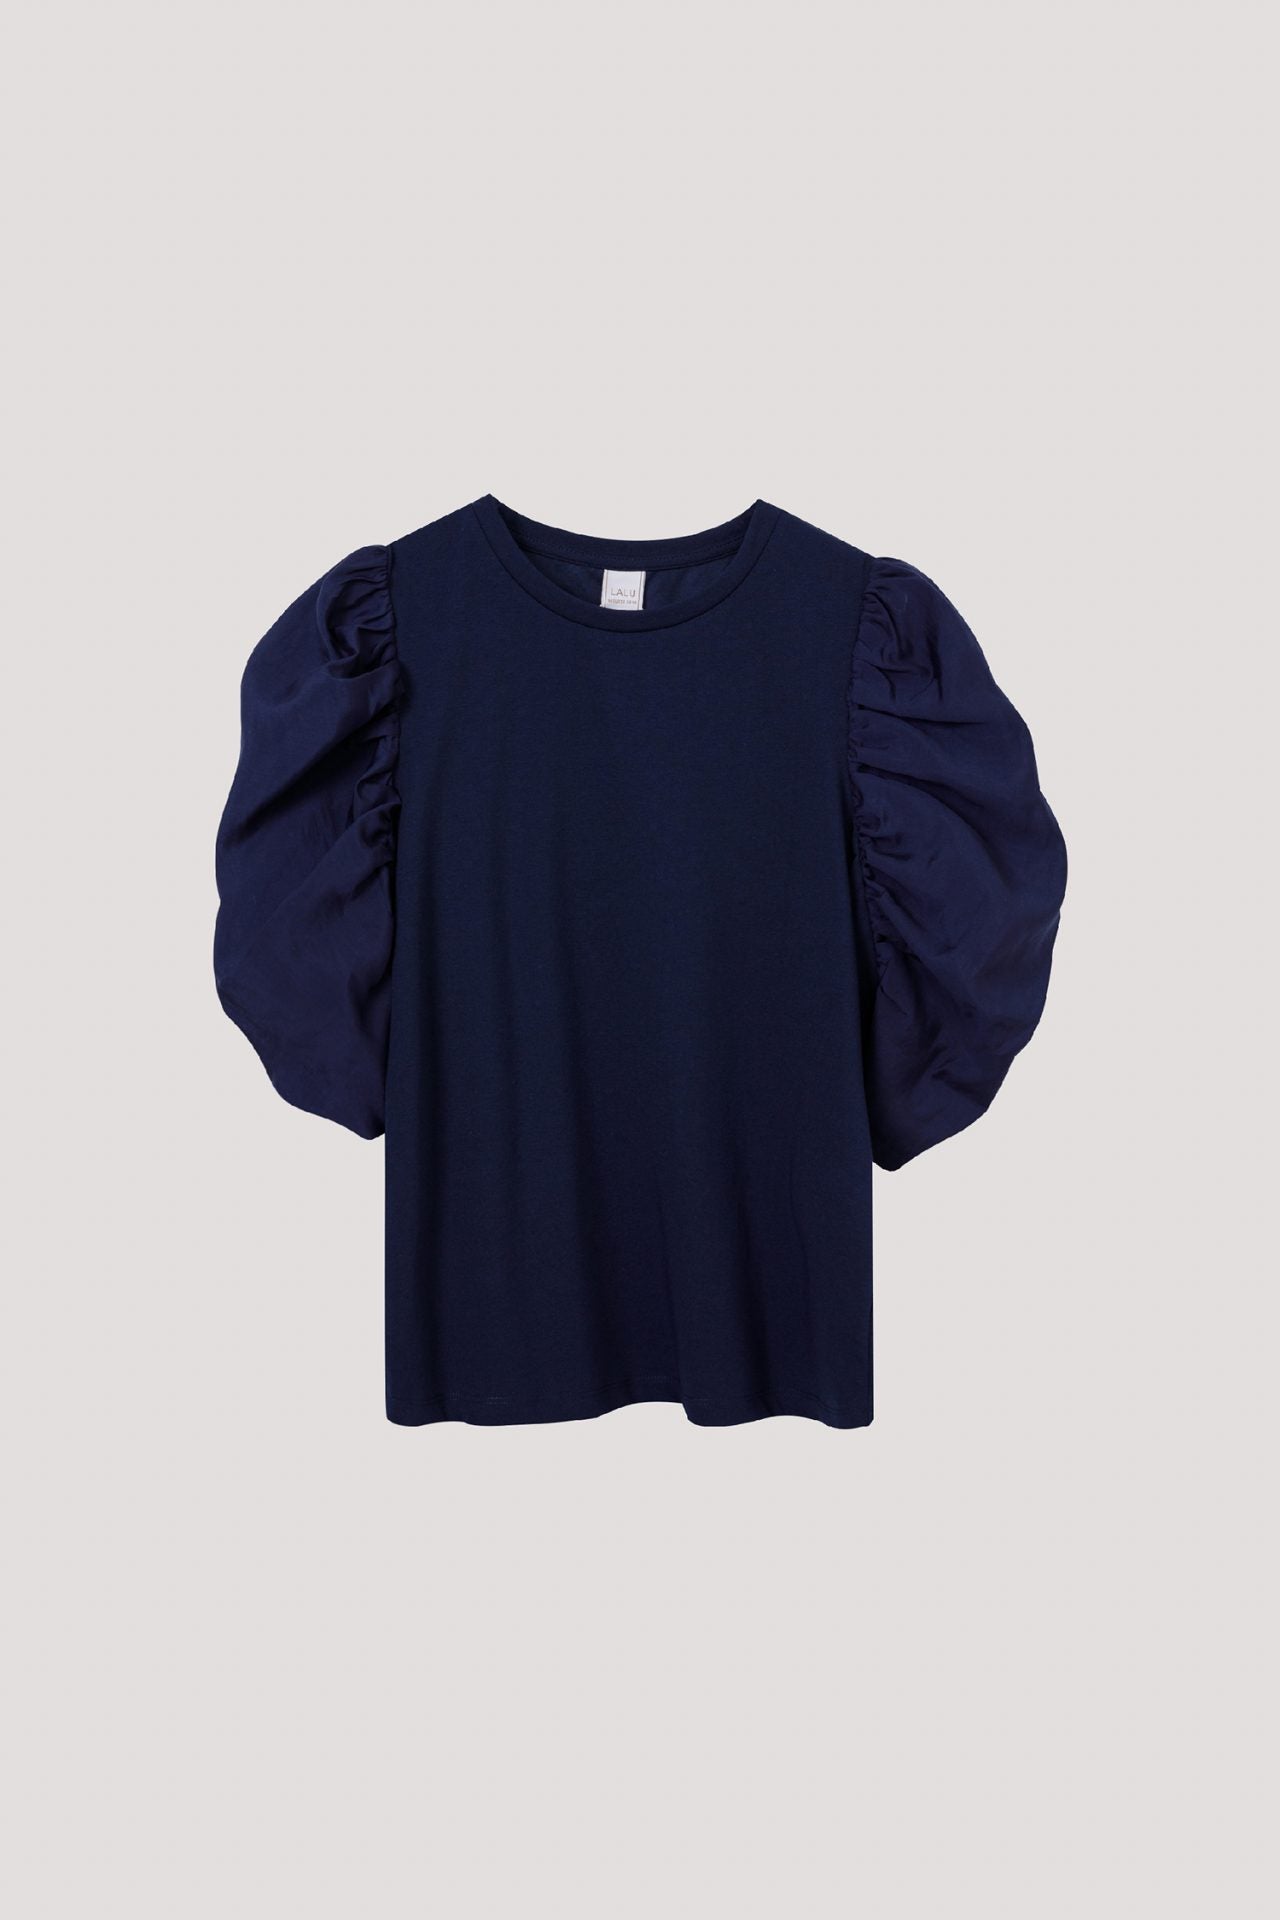 BT 9670 PUFFED SLEEVES BLOUSE NAVY